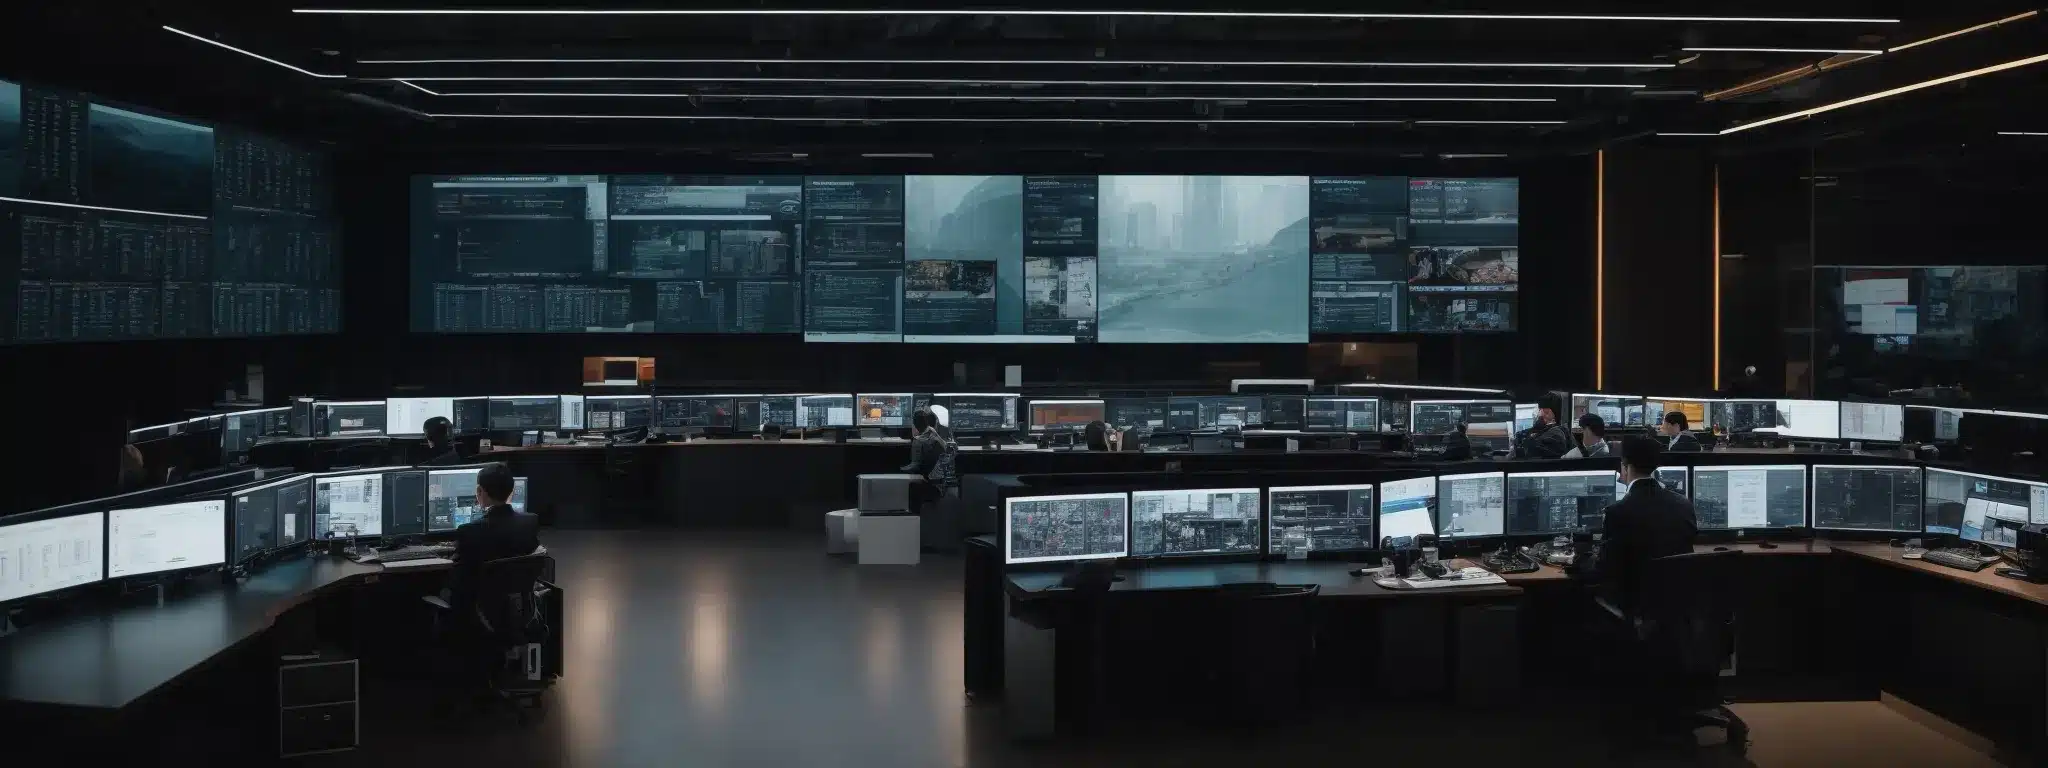 A Sleek, Modern Command Center Where A Single Operator Observes Multiple Screens Displaying Neatly Organized Email Campaign Flows.